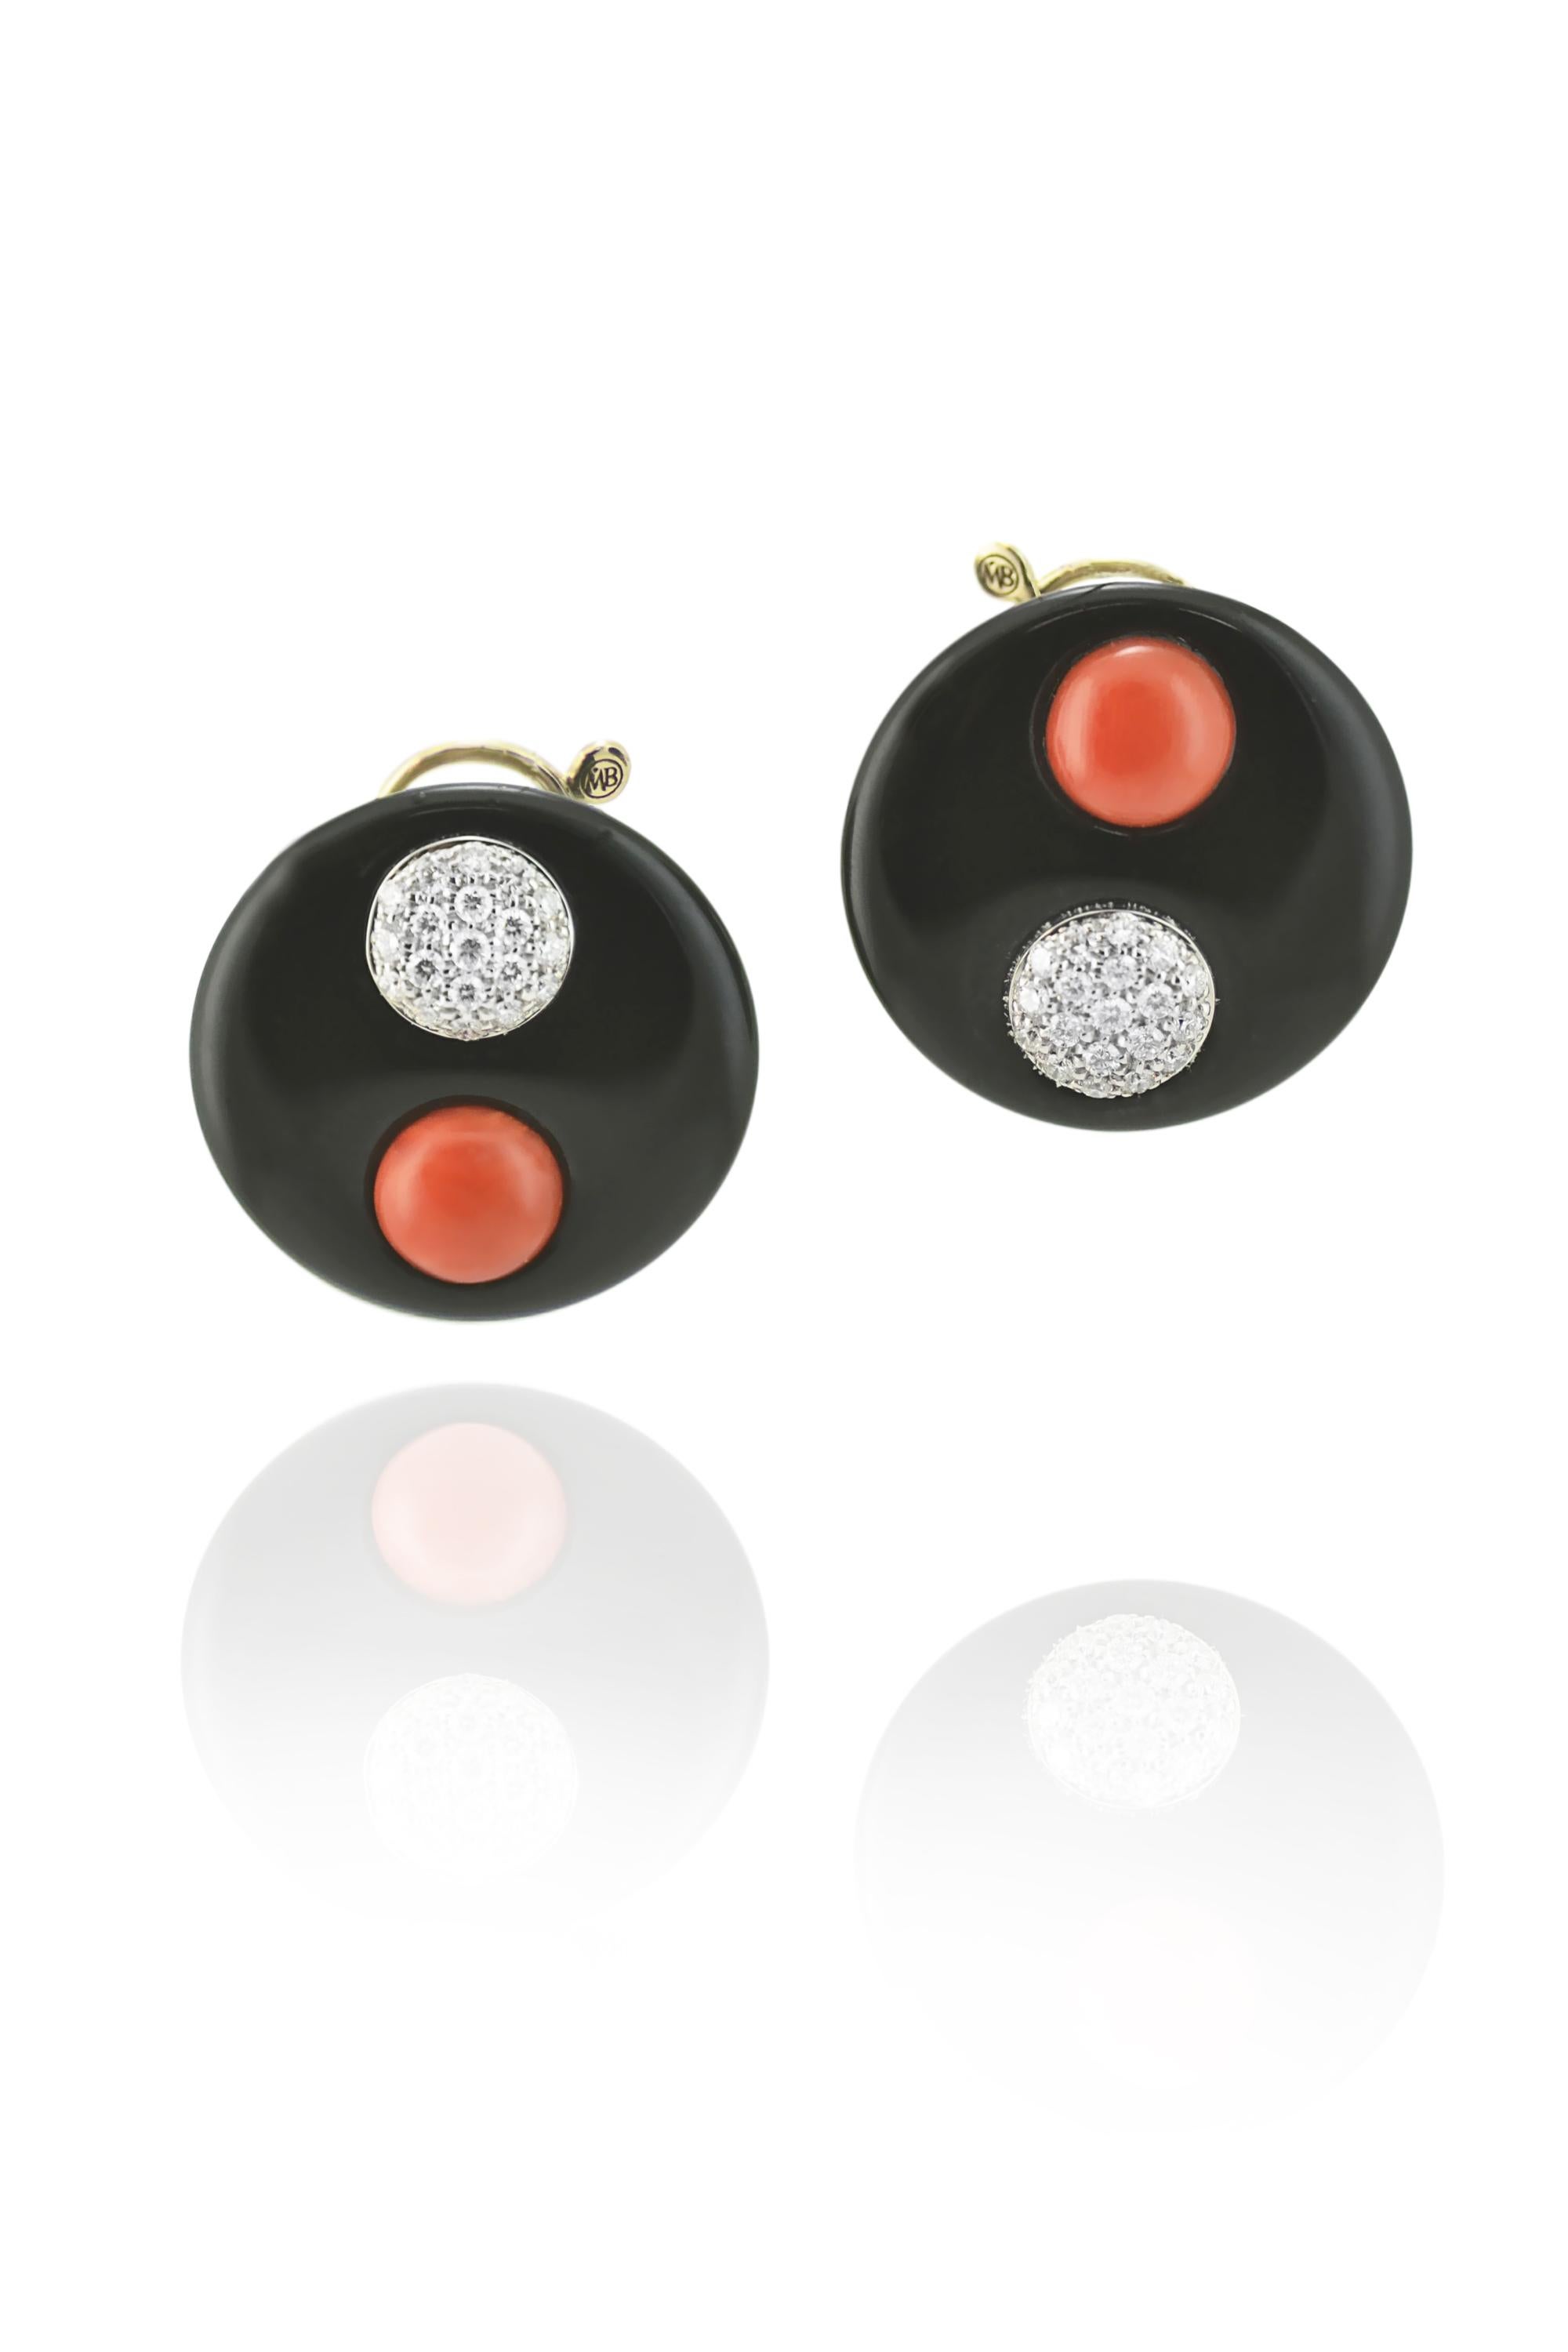 Stylish earclips designed and handcrafted in Margherita Burgener family workshop, Italy.
Round onyx discs,  featuring a diamond pavé detail and a round red rubrum coral botton.

Fitting and clips for pierced ears - on request we offer complimentary